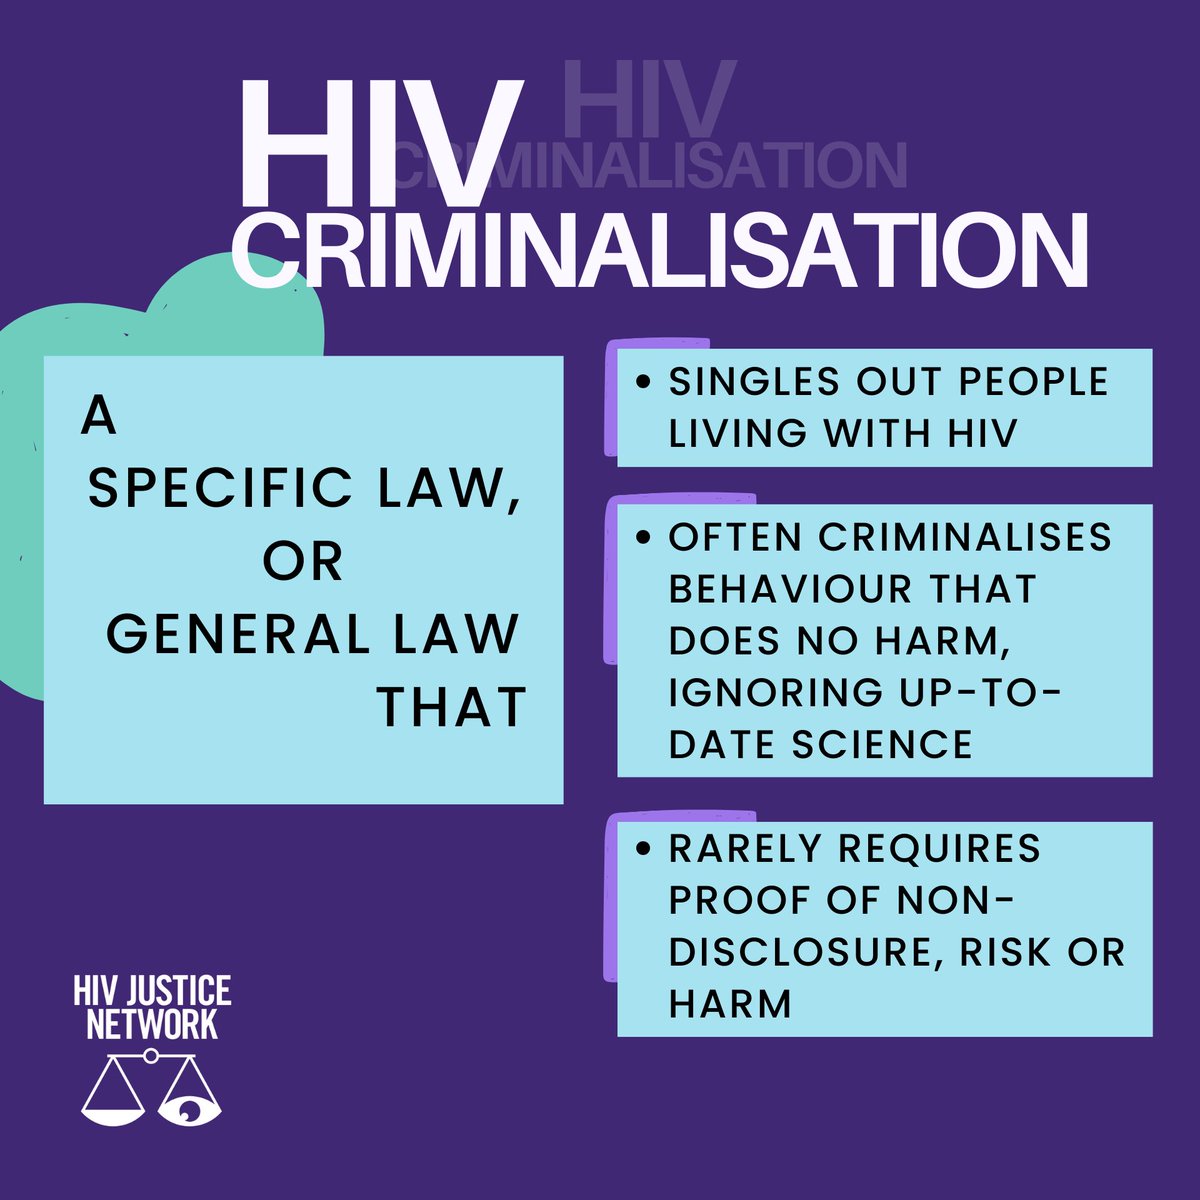 How does #HIV #criminalisation look like? 📍A specific law, or general law that: 📍Singles out people living with HIV 📍Often criminalises behaviour that does no harm, ignoring up-to-date science 📍Rarely requires proof of non-disclosure, risk or harm hivjusticeworldwide.org/en/what-is-hiv…